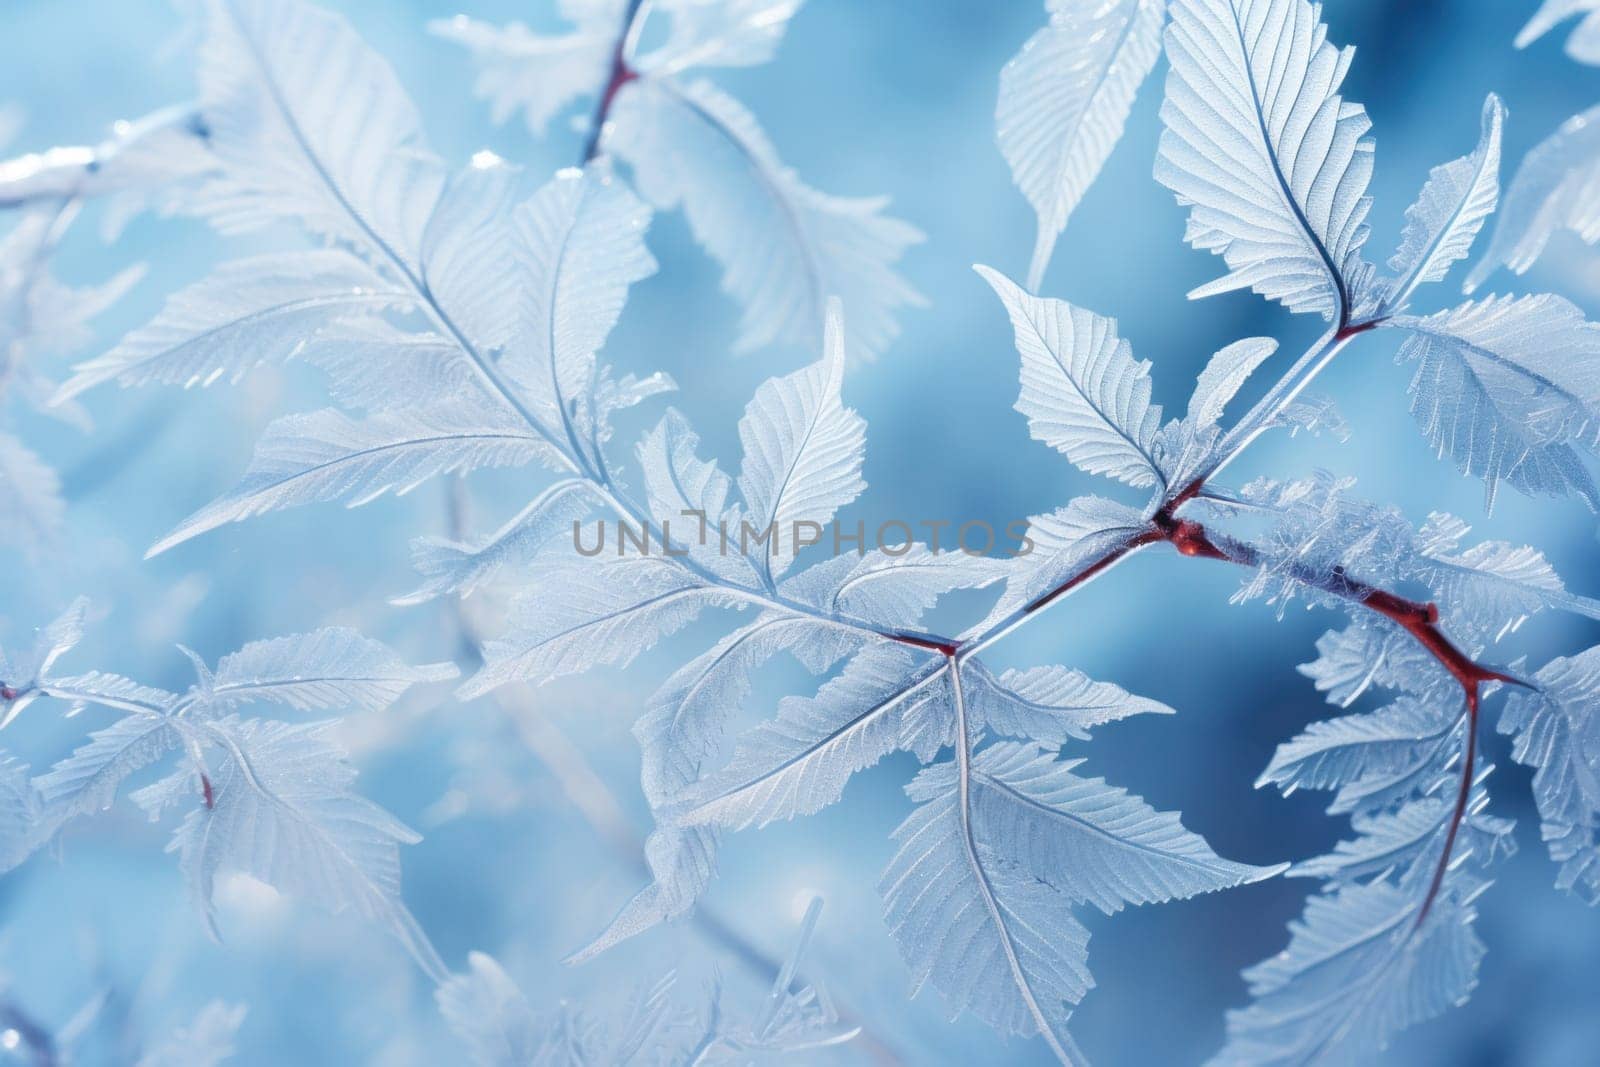 An exquisite display of artistry, capturing the intricate and mesmerizing patterns formed by frost on windows, leaves, and various surfaces through the lens of macro photography, resulting in striking and abstract visual compositions.